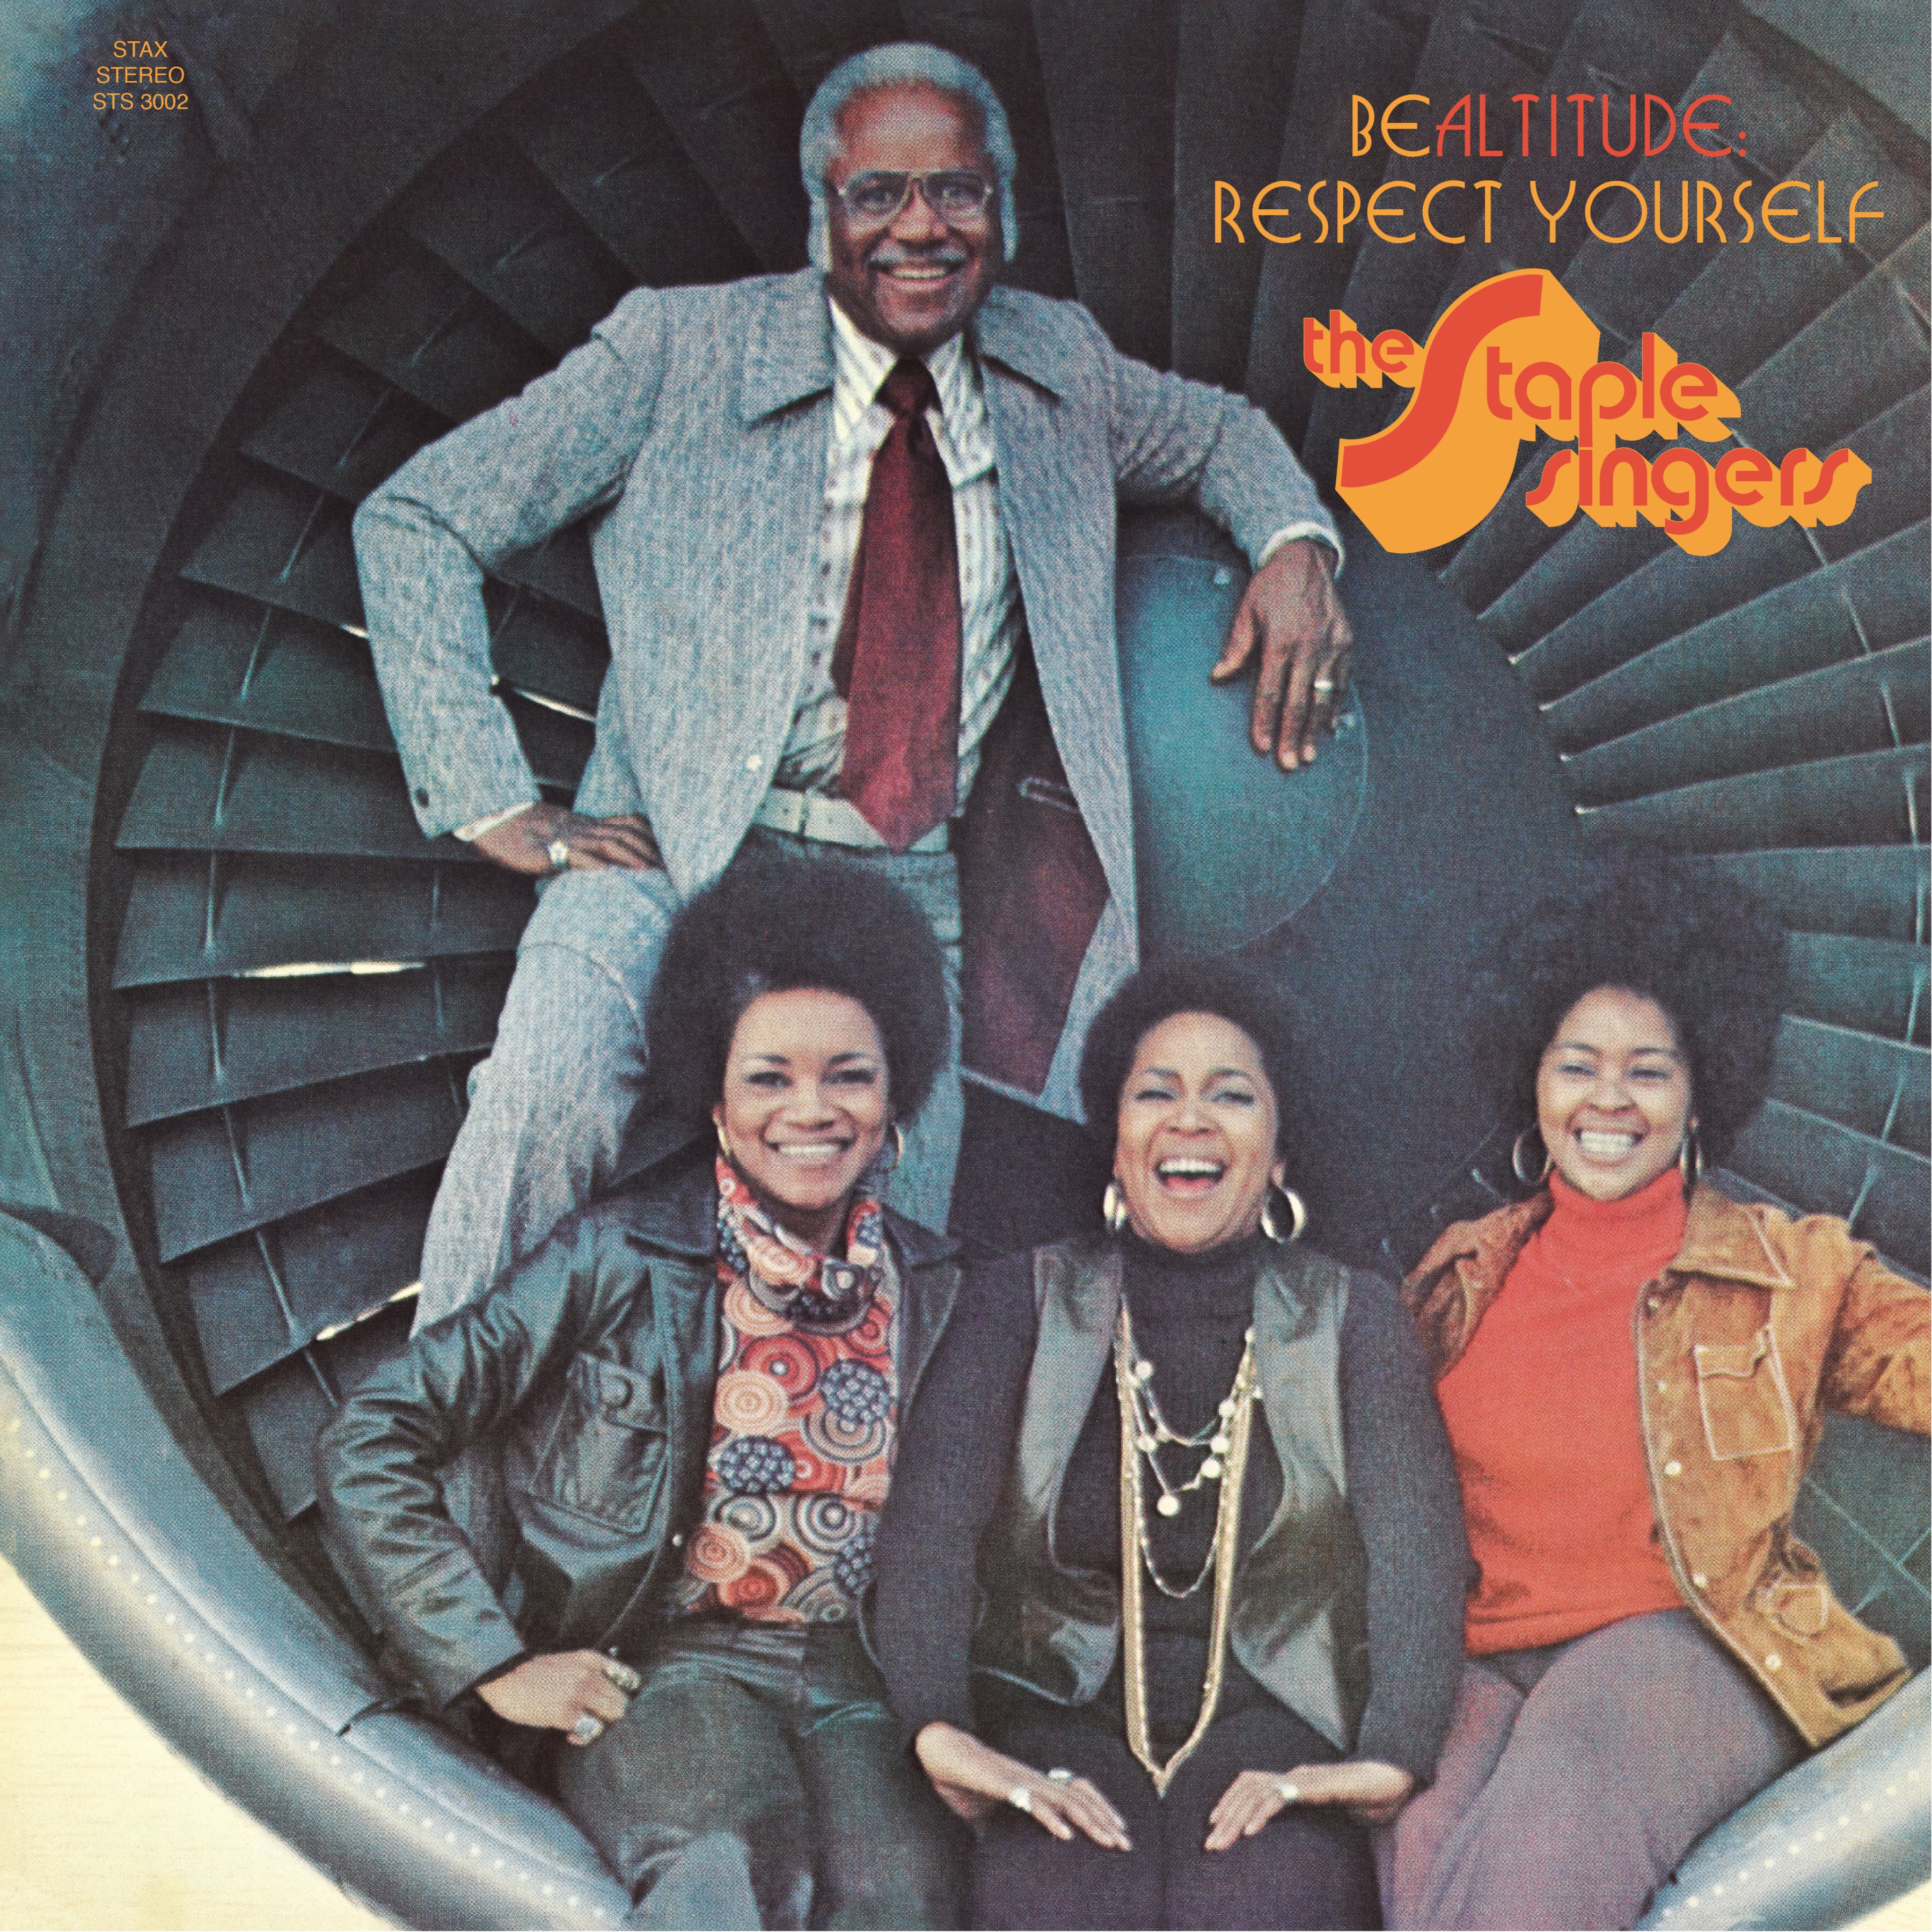 THE STAPLE SINGERS' BE ALTITUDE: RESPECT YOURSELF GETS 50th 